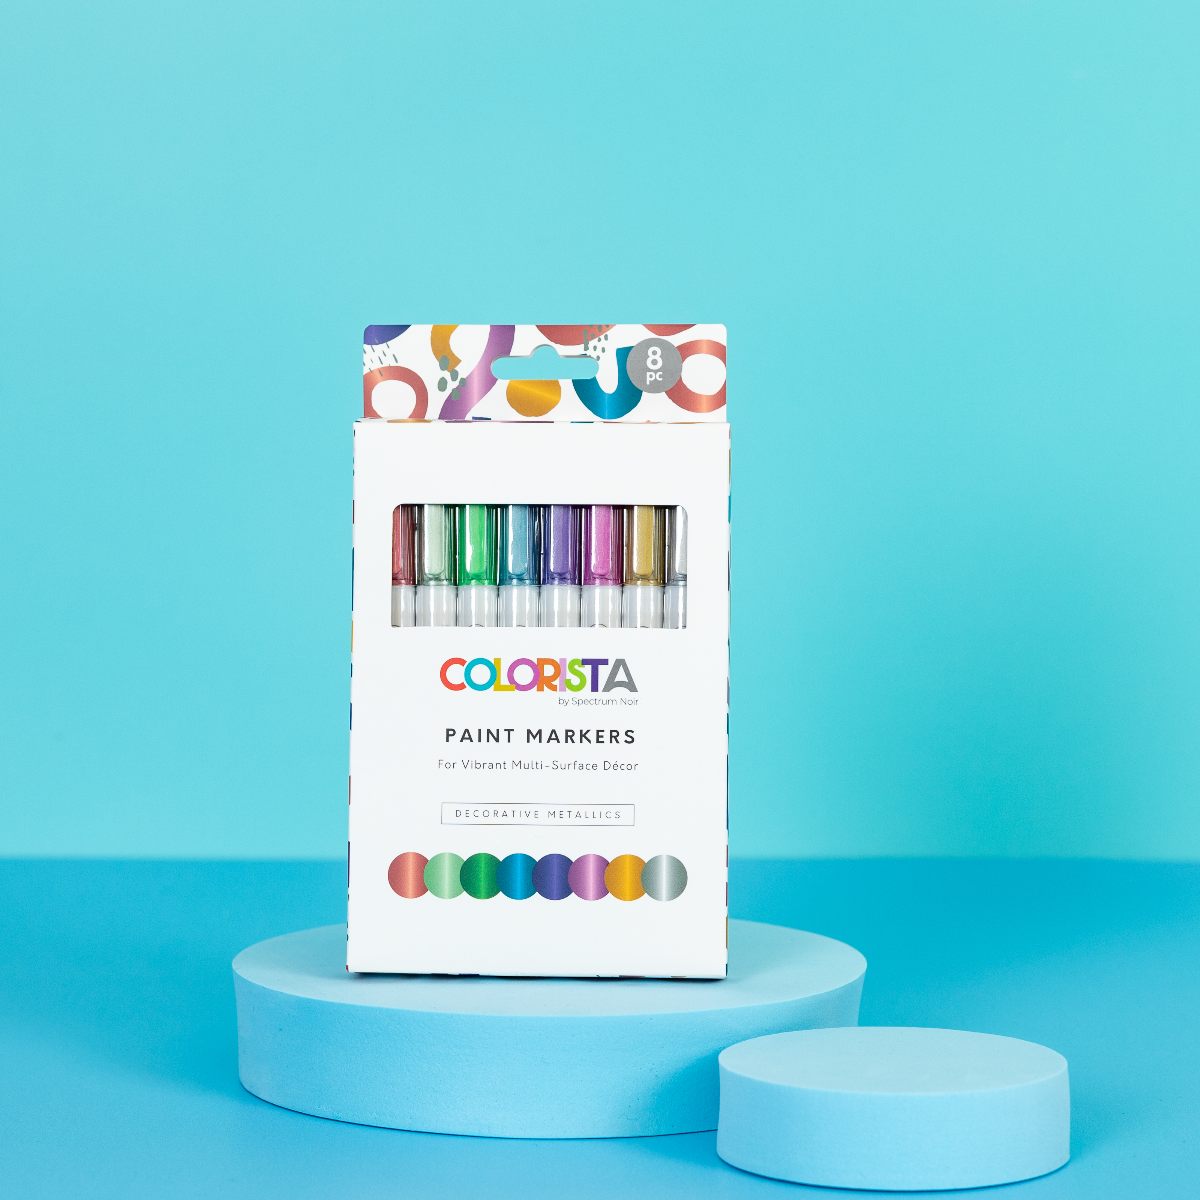 DecoColor And Craft Smart Paint Marker Review